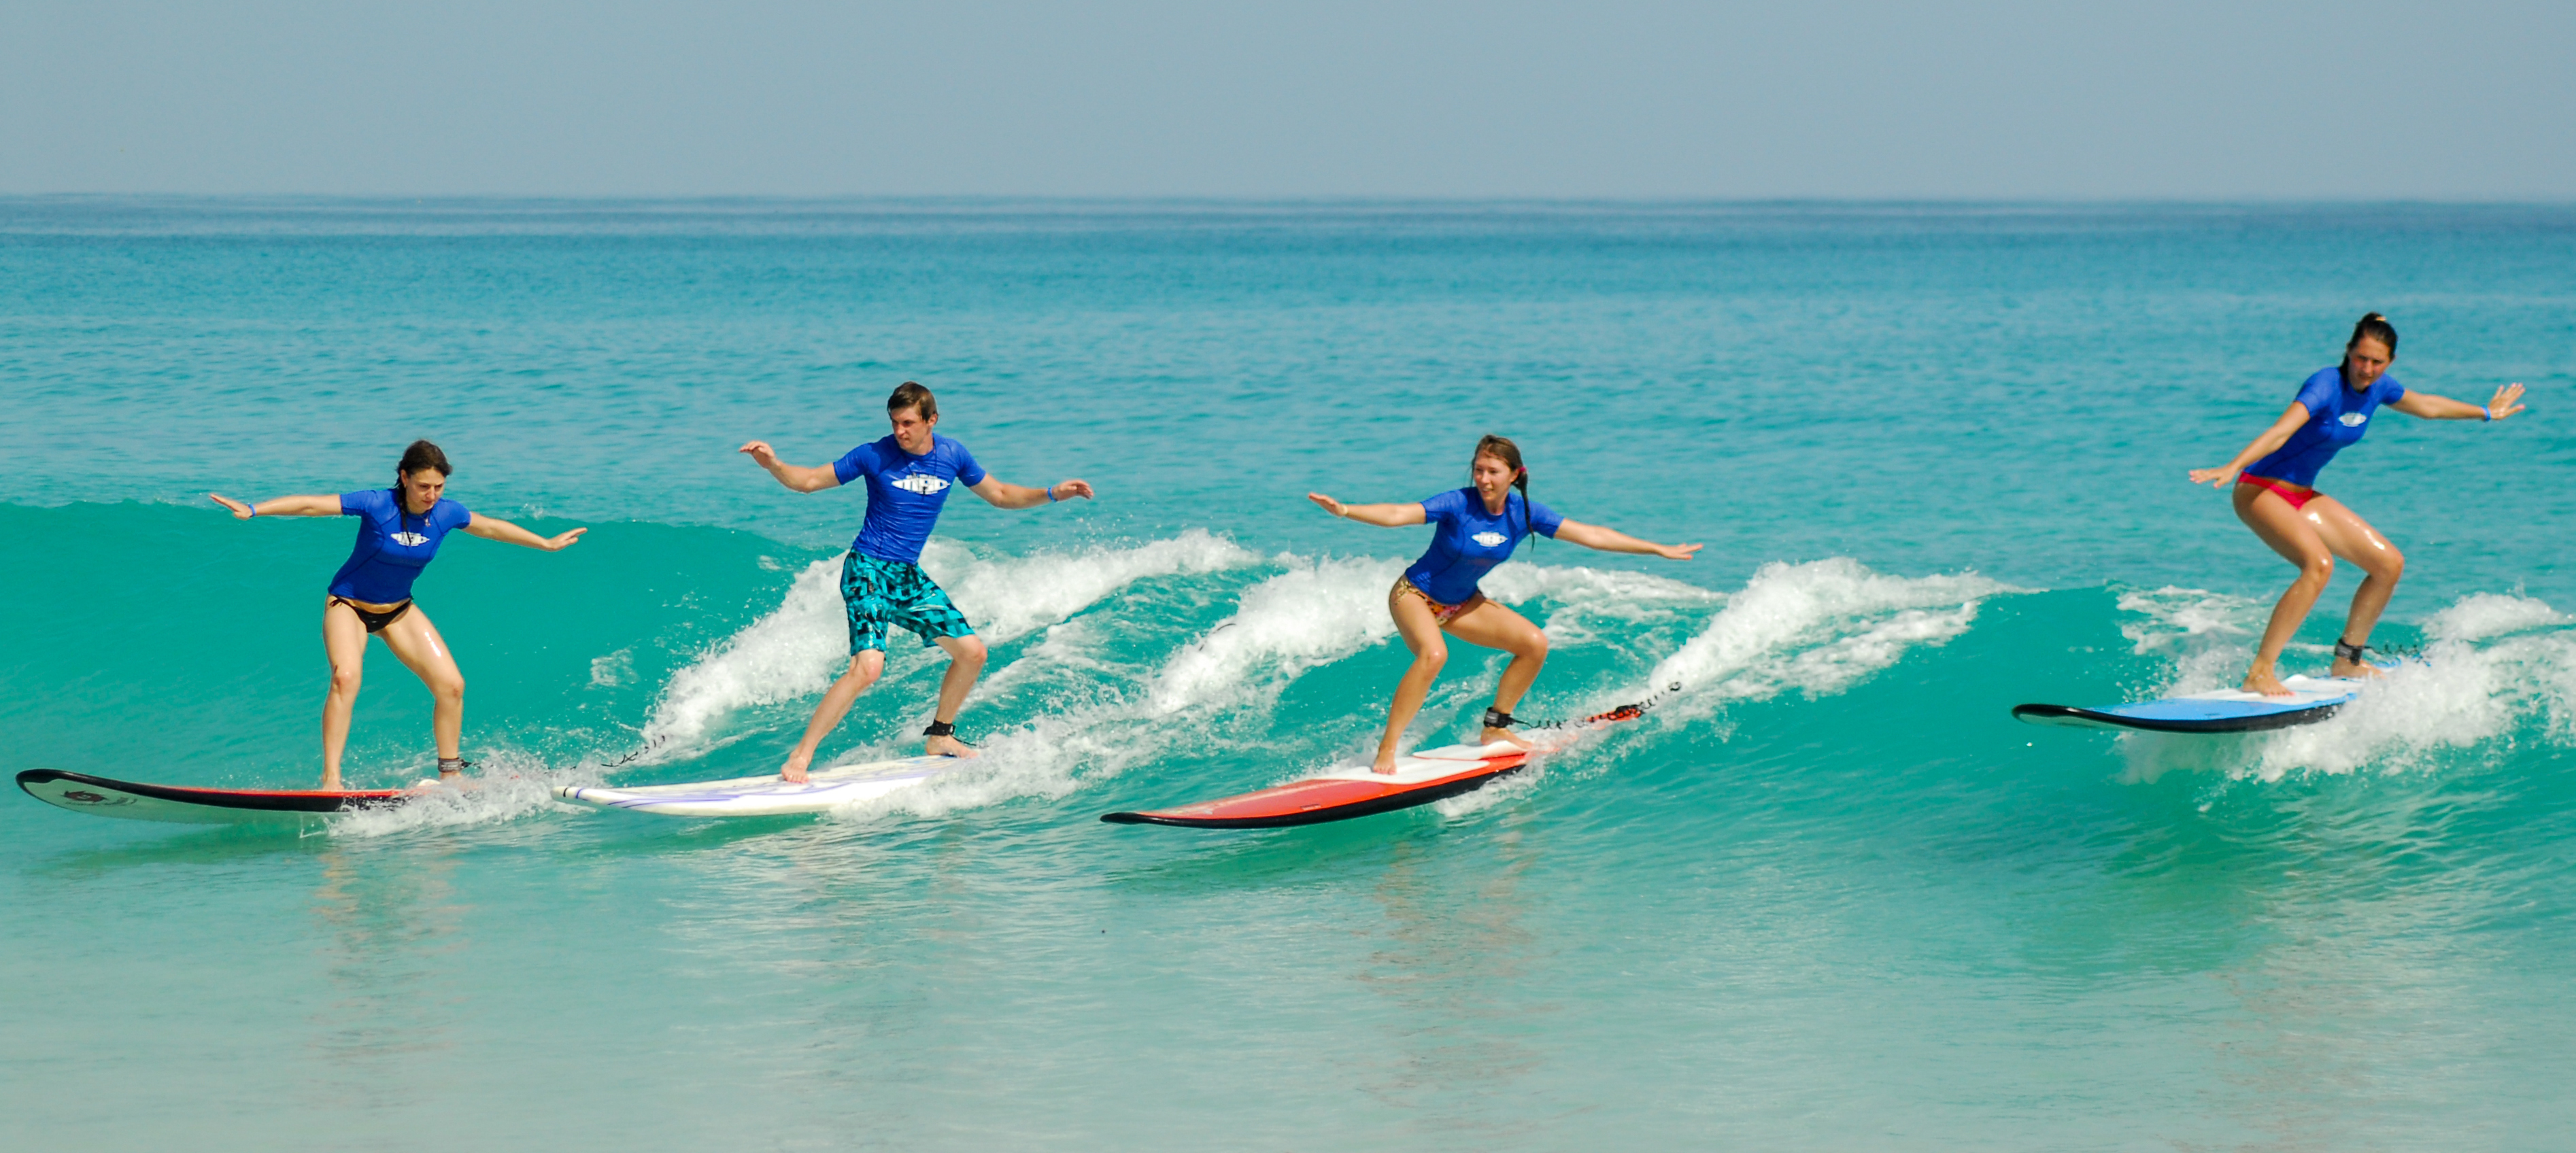 Why Choose Adventures In Malibu for Surf Lessons | Adventures in Malibu